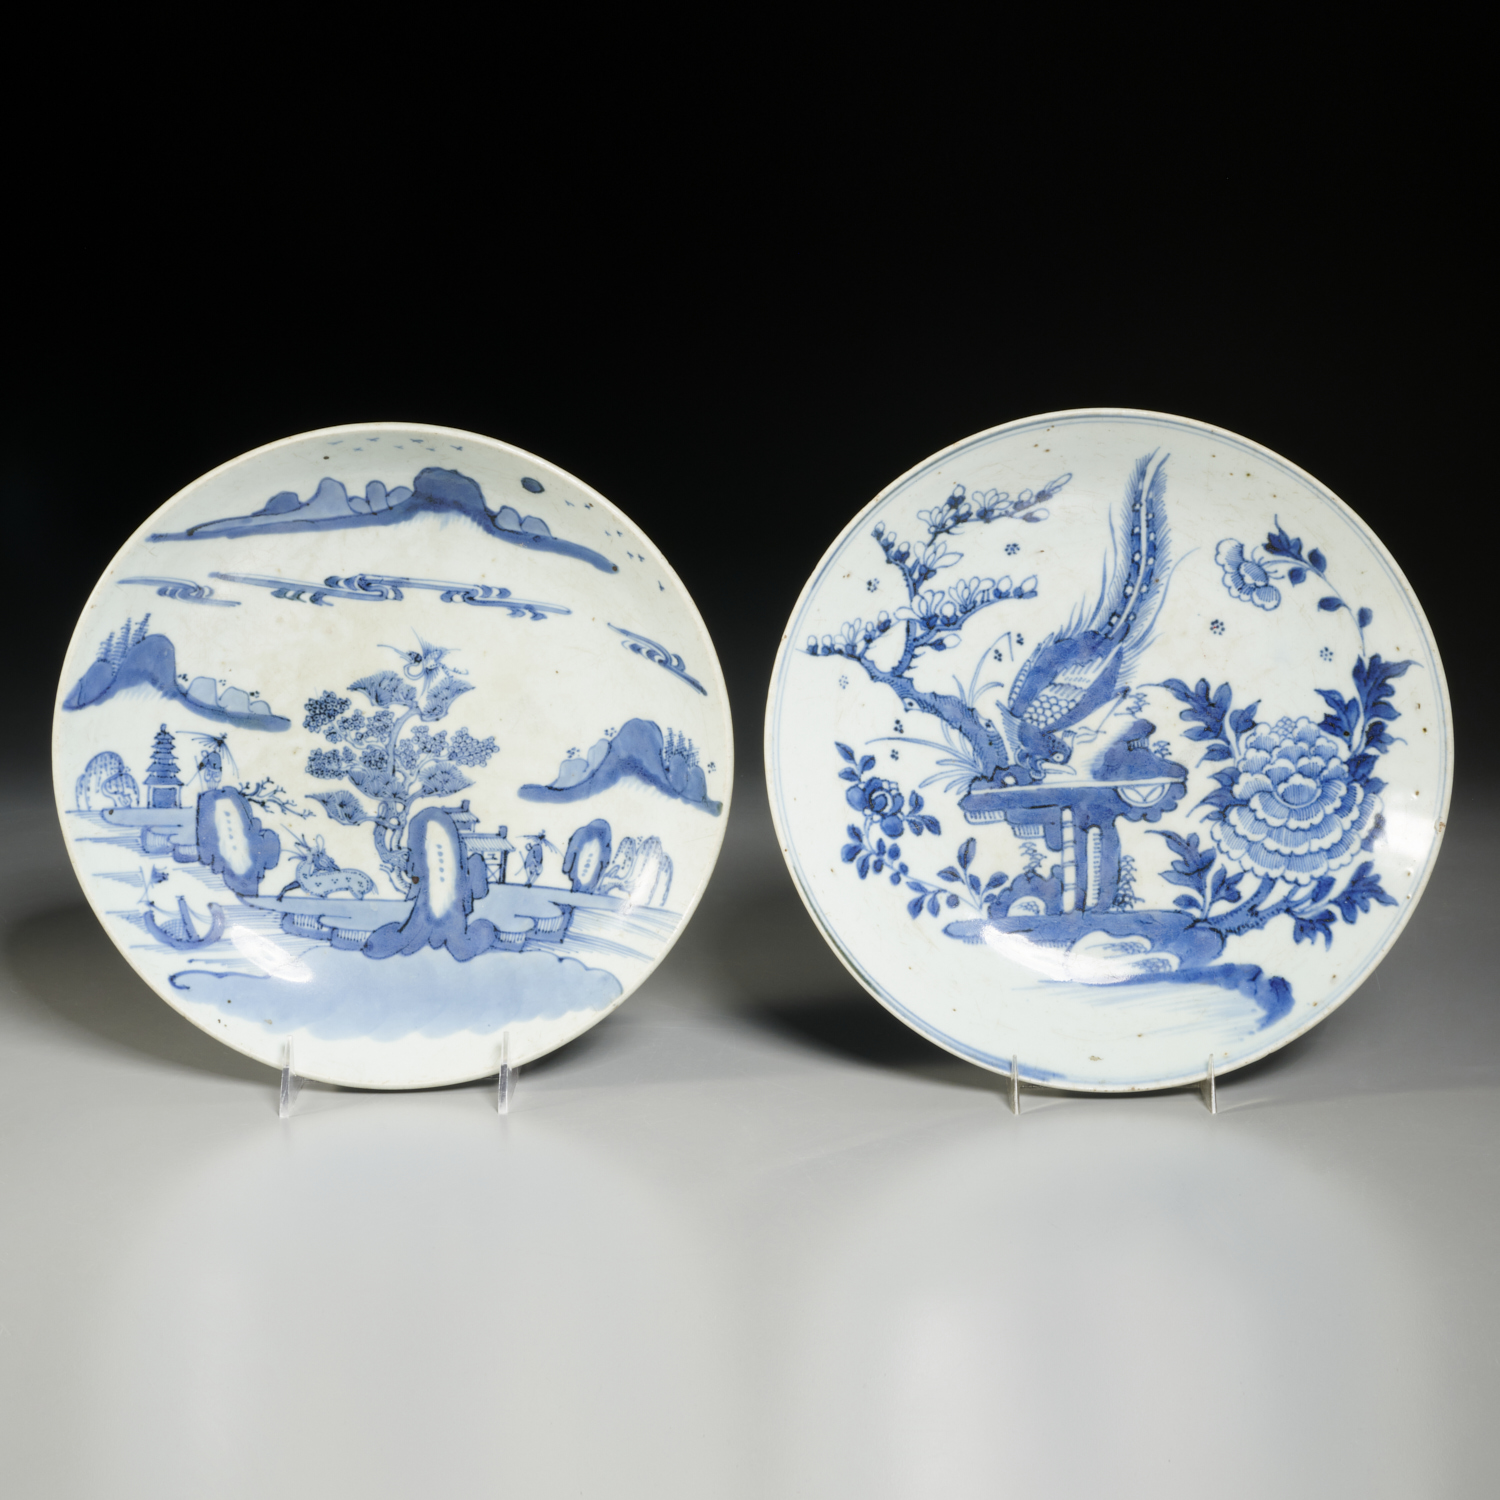  2 CHINESE BLUE AND WHITE PLATES 3c279d